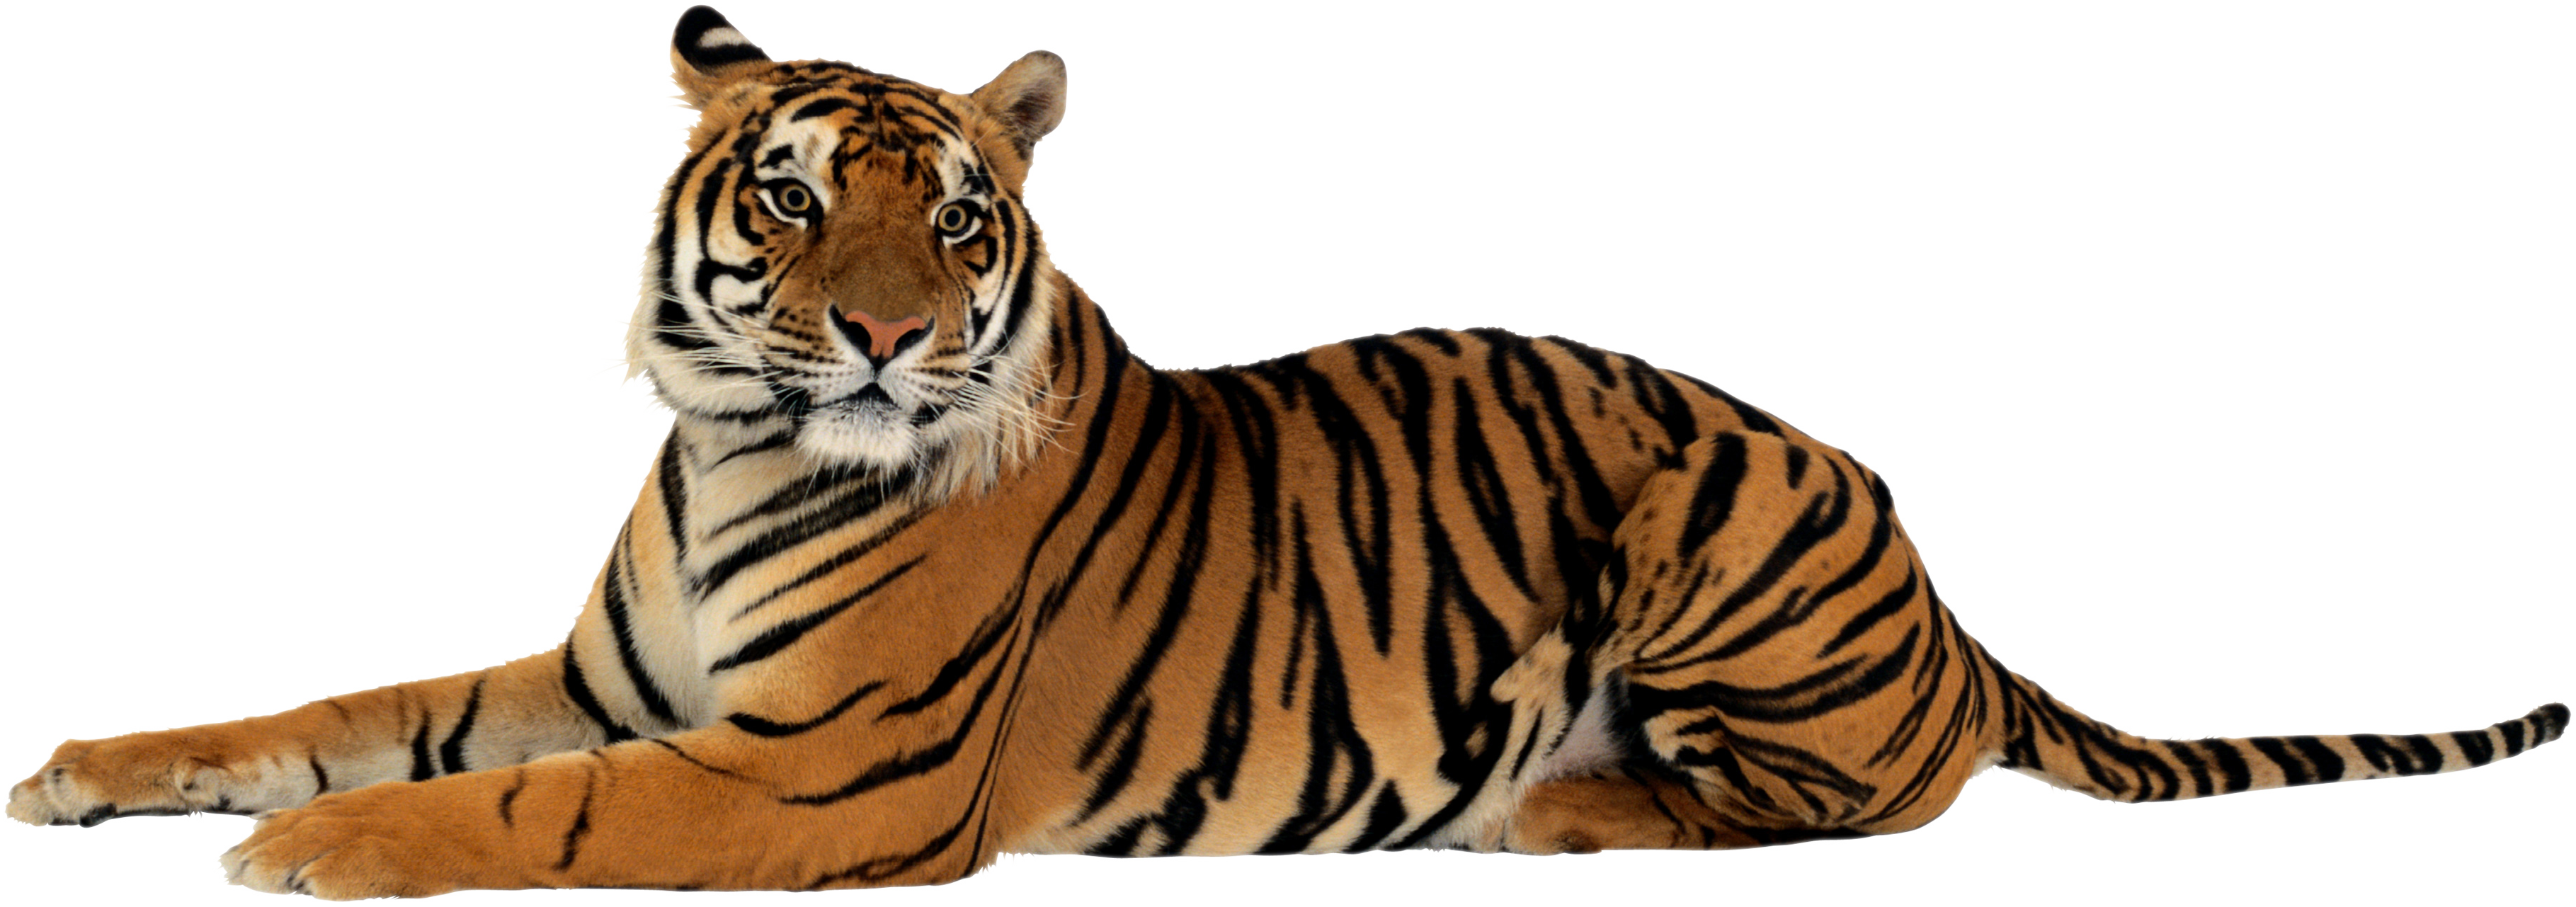 tiger clipart png - photo #45